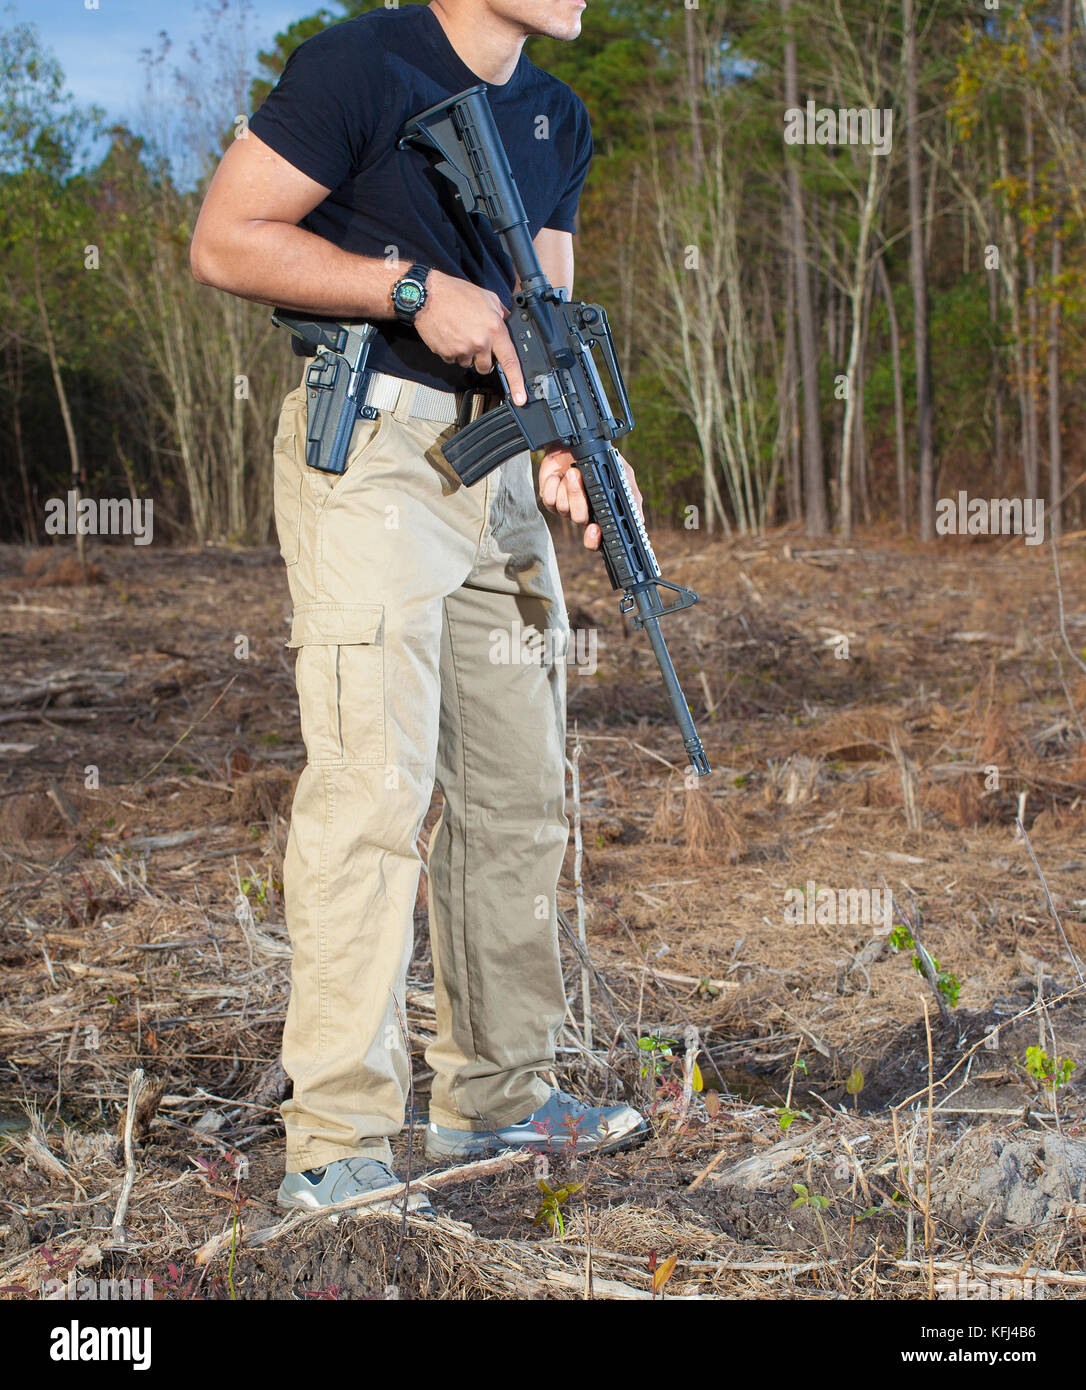 Man with a semi automatic rifle and handgun in a field Stock Photo